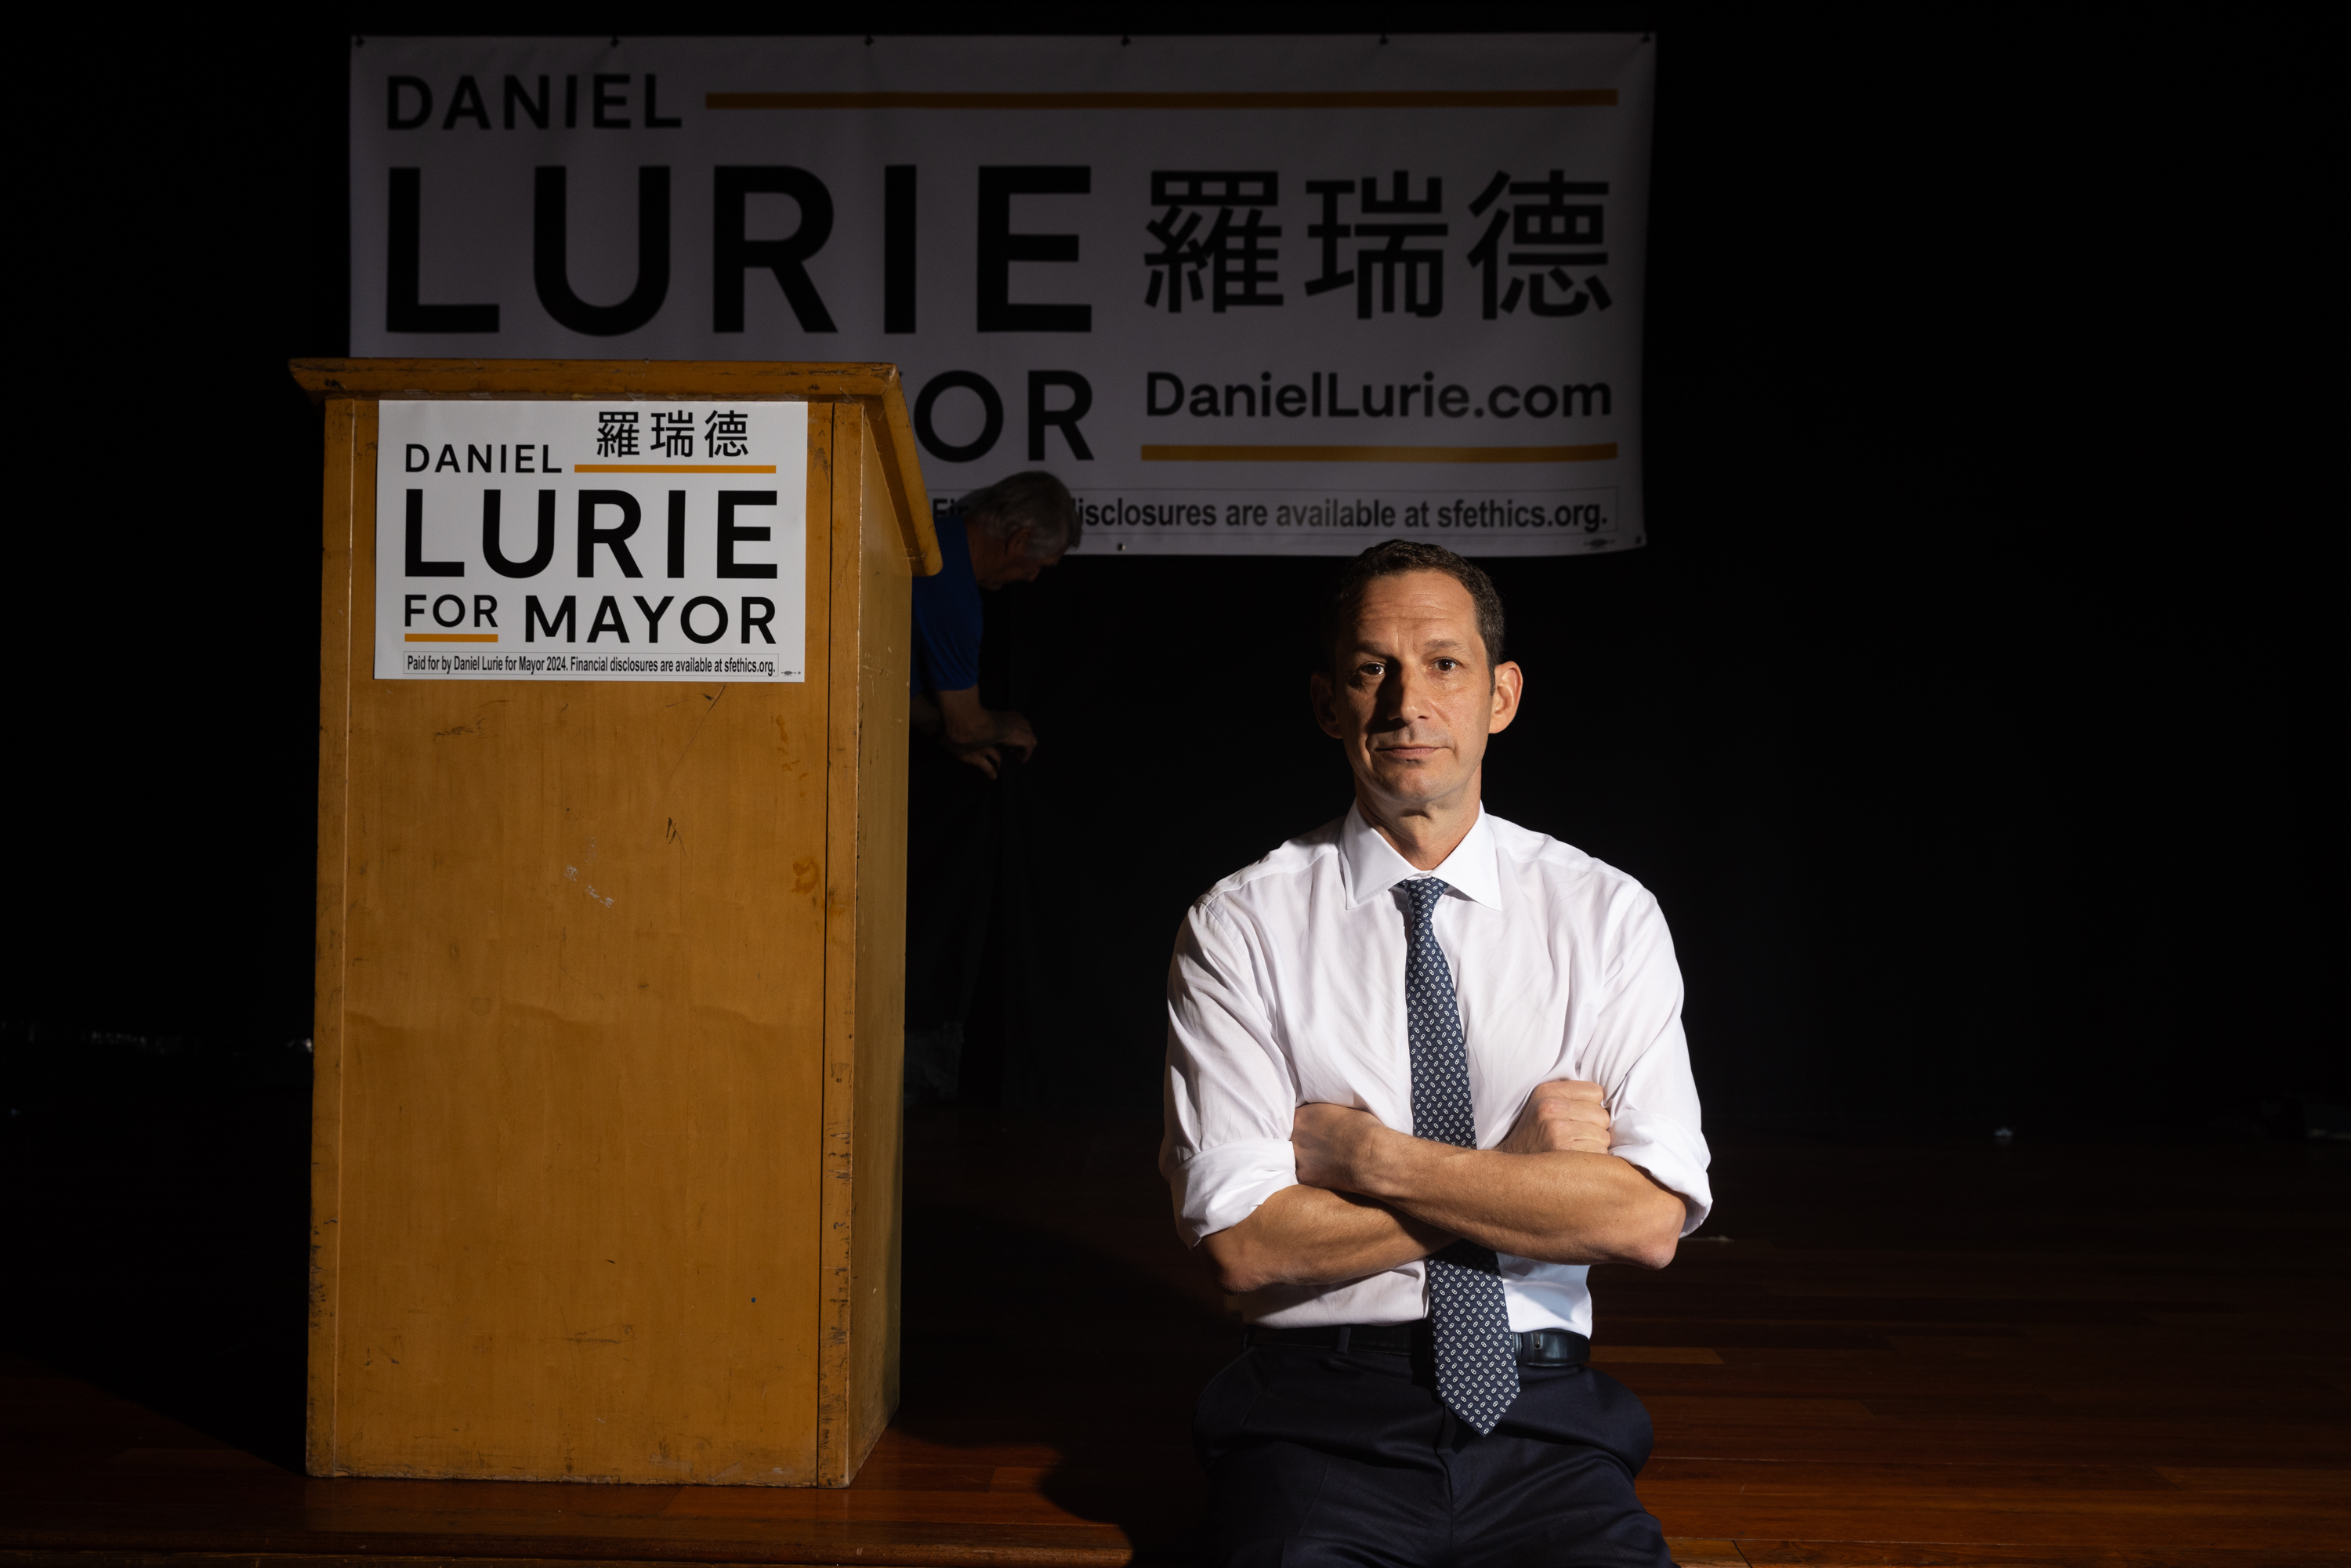 A man in a shirt and tie sits cross-armed near a podium with &quot;Daniel Lurie for Mayor&quot; signs.